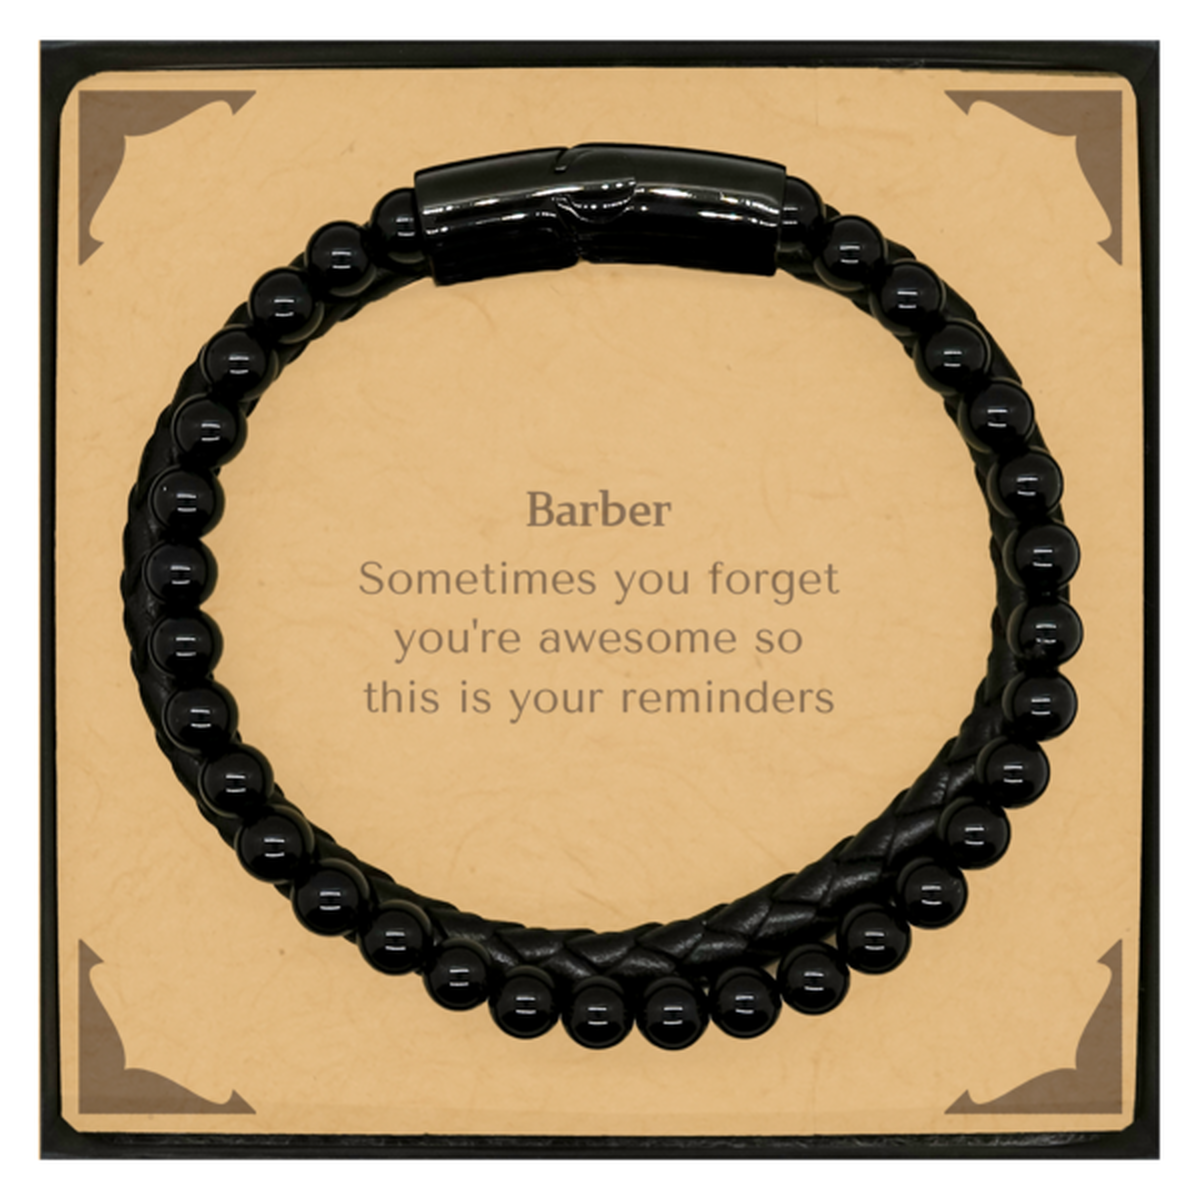 Sentimental Barber Stone Leather Bracelets, Barber Sometimes you forget you're awesome so this is your reminders, Graduation Christmas Birthday Gifts for Barber, Men, Women, Coworkers